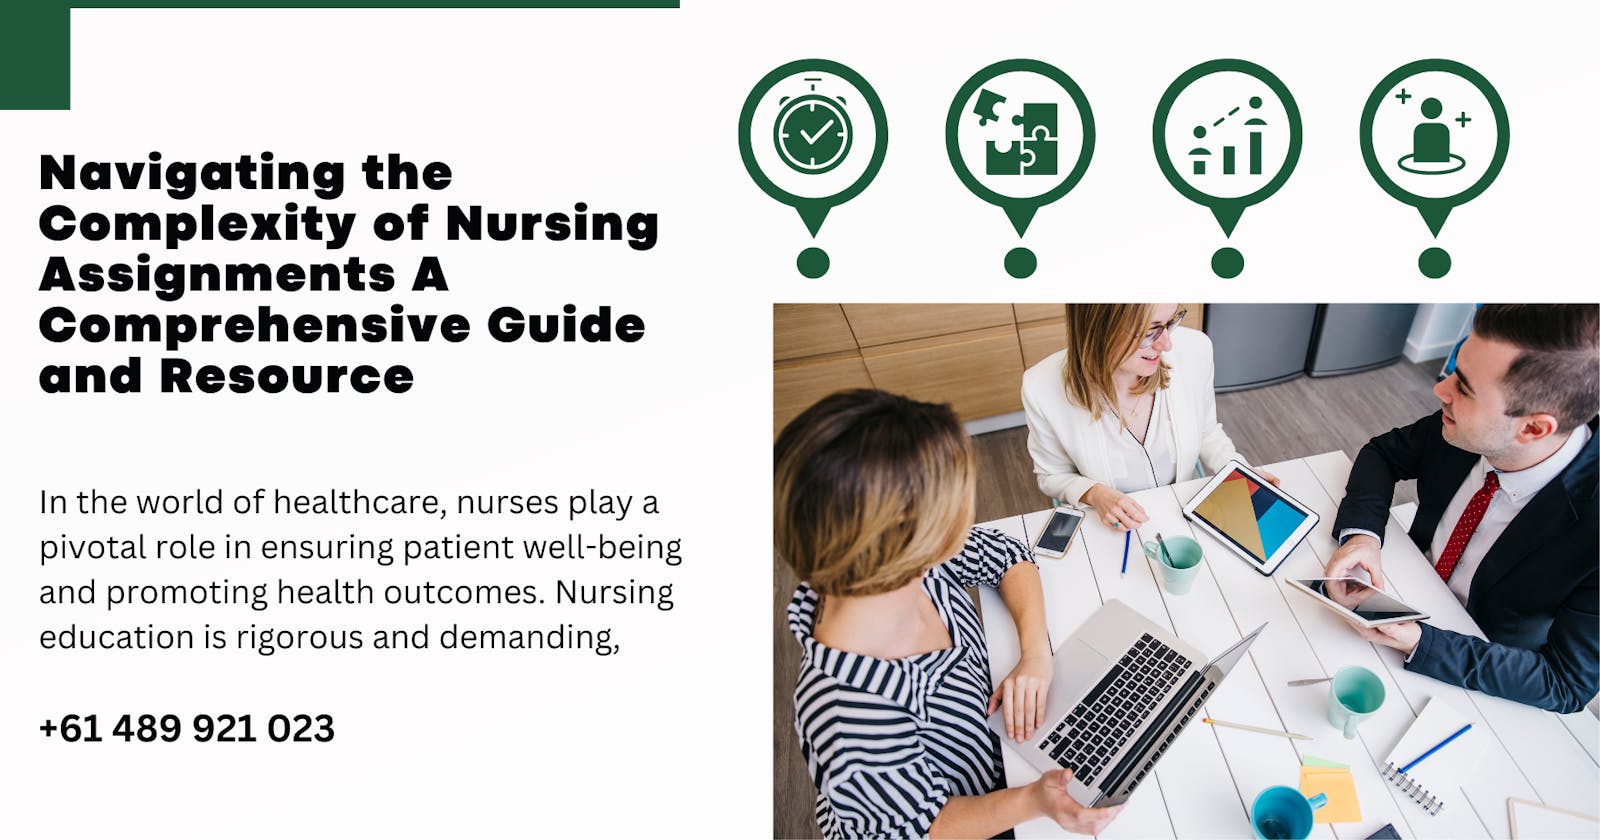 Navigating the Complexity of Nursing Assignments A Comprehensive Guide and Resource